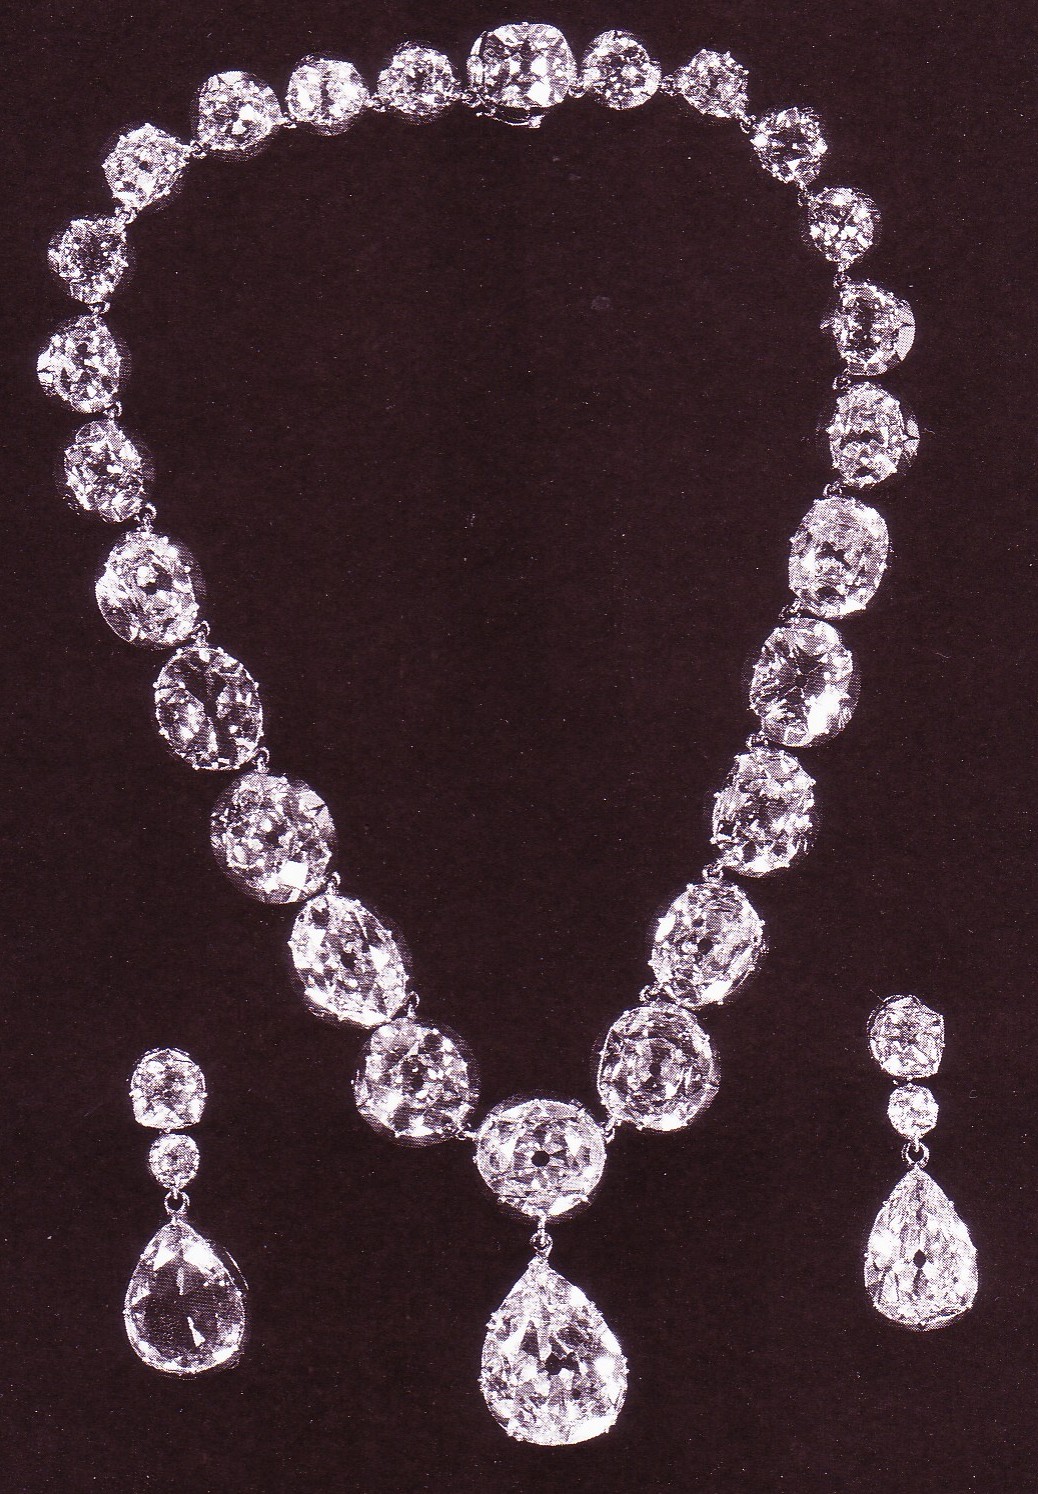 Queen Victoria's Collet Necklace and Earrings